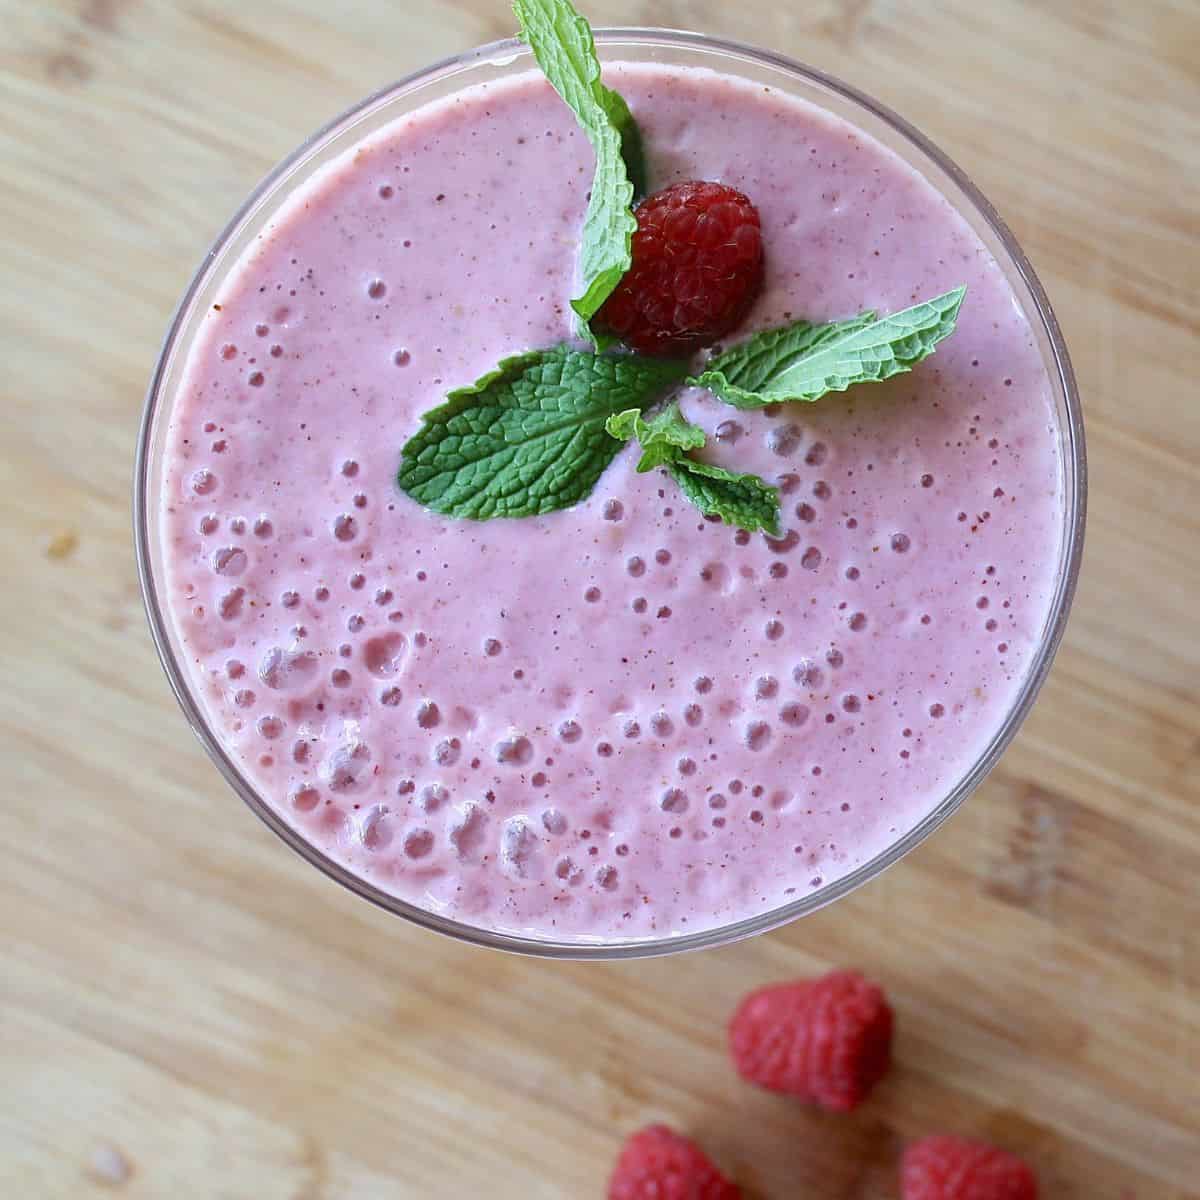 raspberry smoothie has many beauty and health benefits